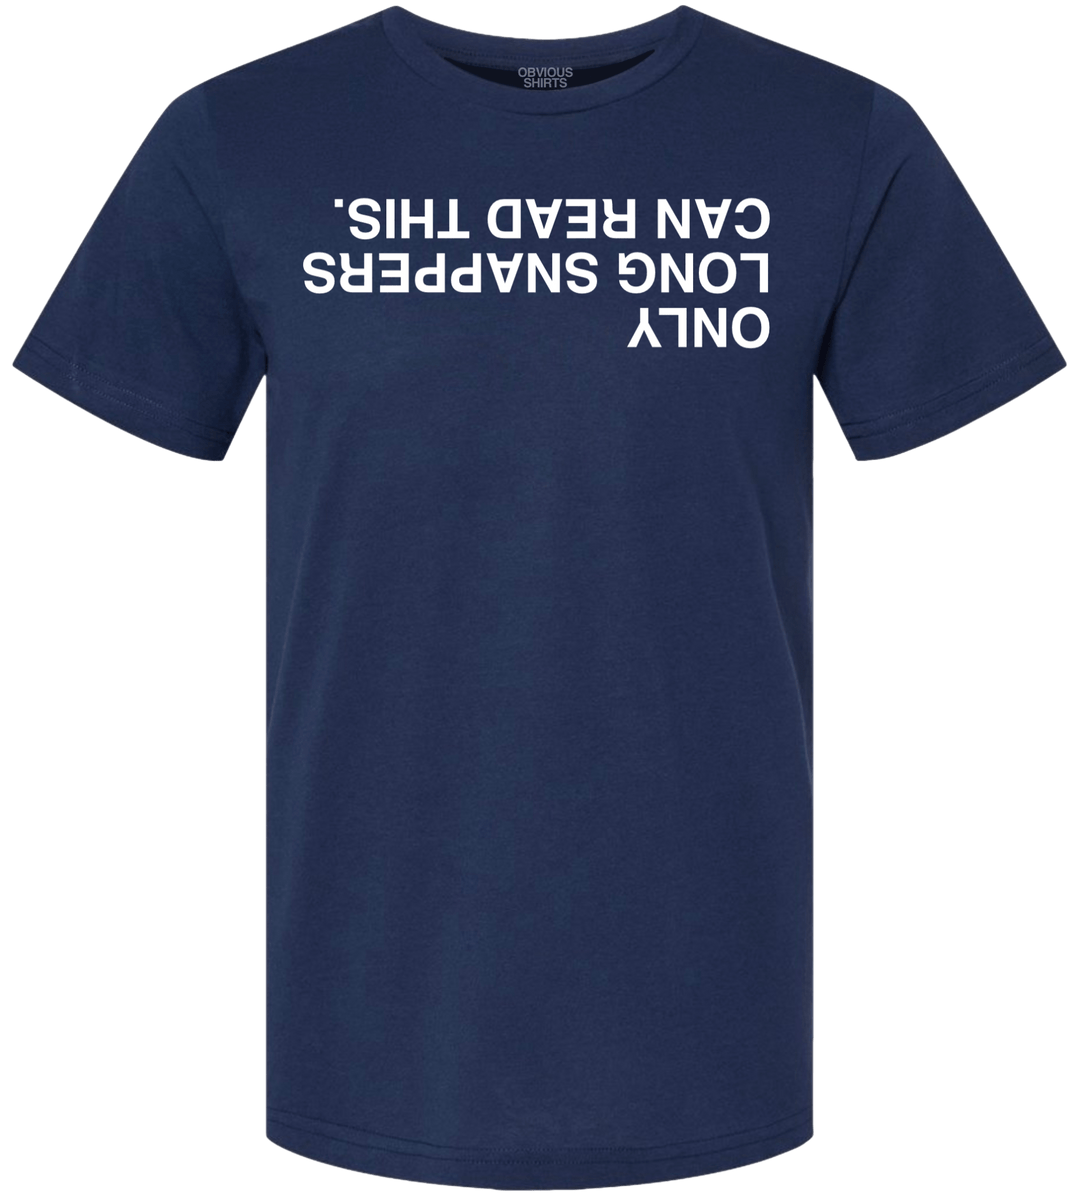 ONLY LONG SNAPPERS CAN READ THIS. (NAVY) - OBVIOUS SHIRTS